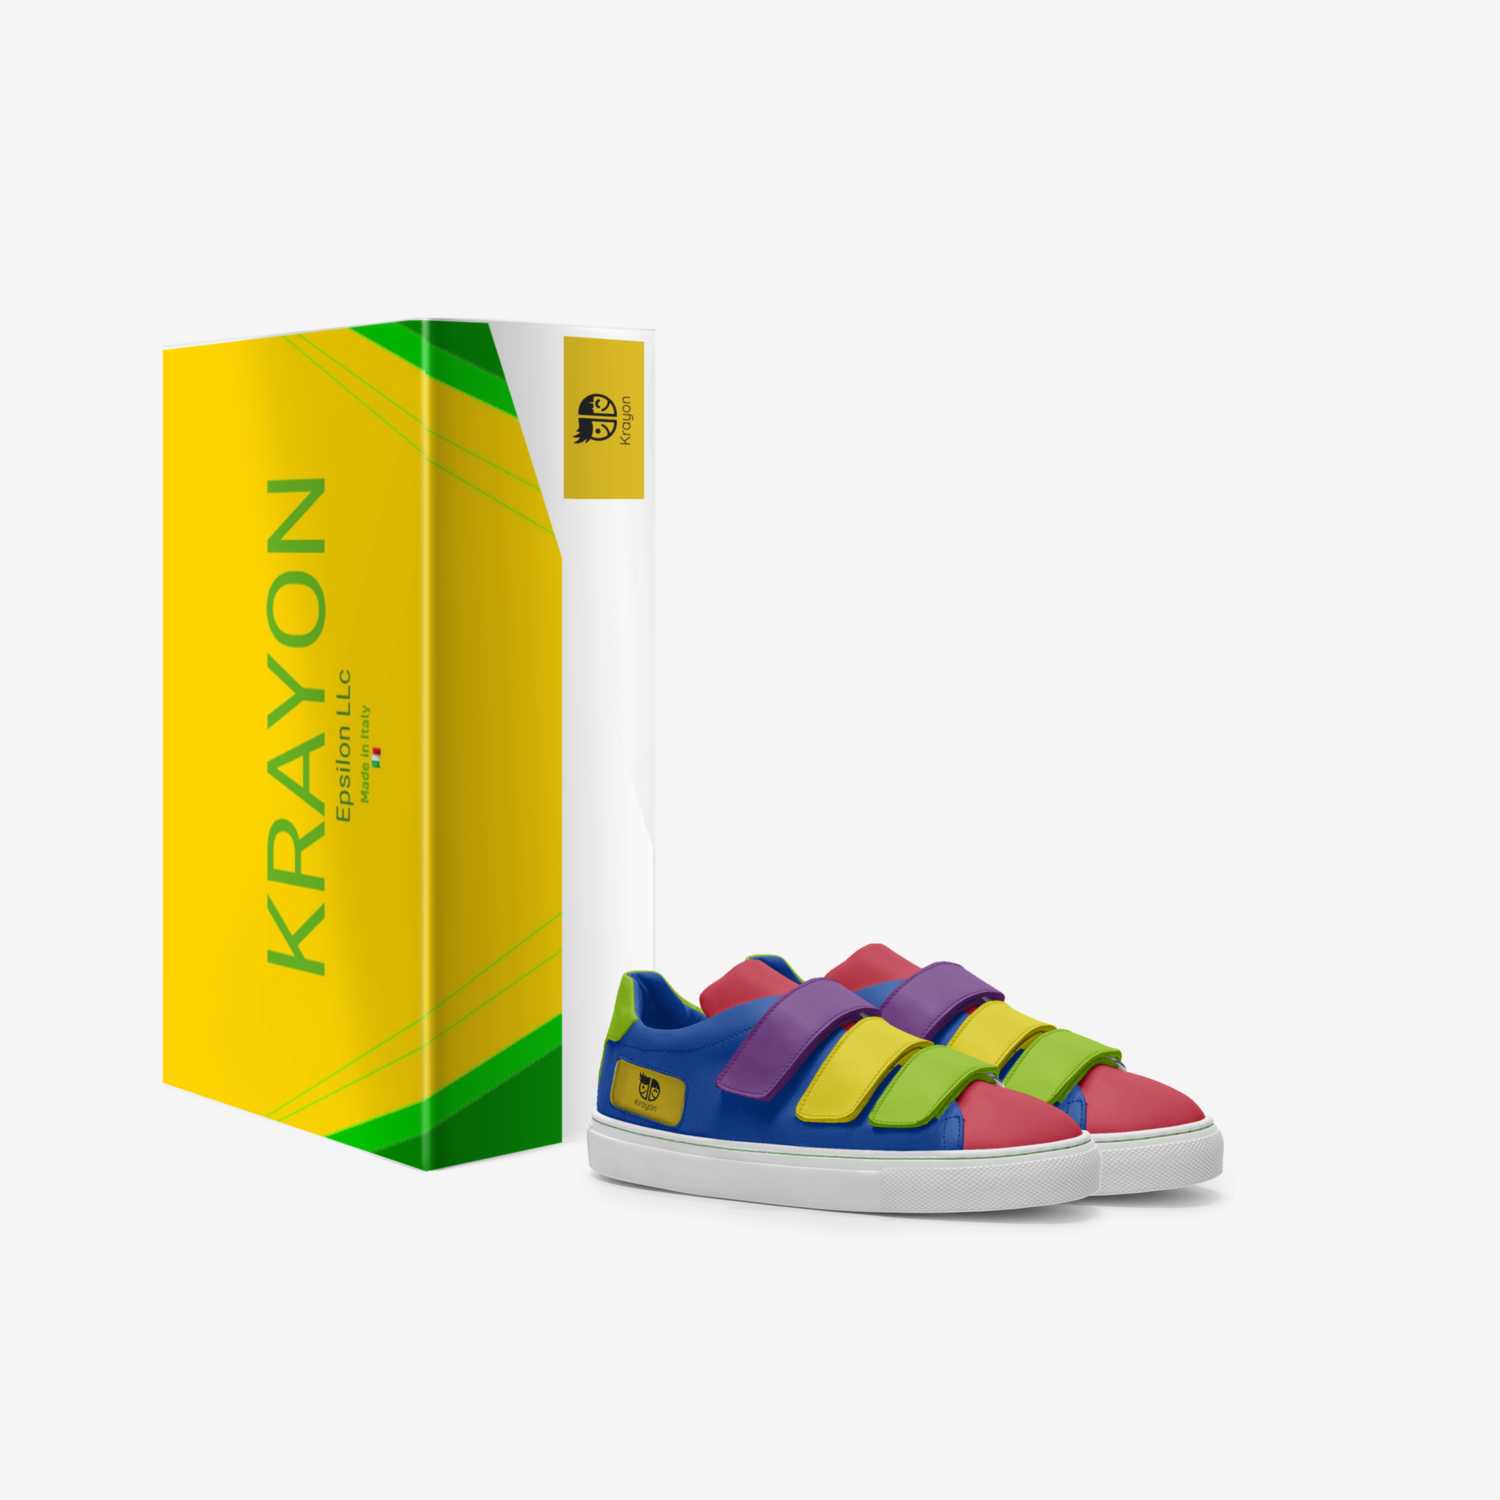 Krayon custom made in Italy shoes by Max Bradley | Box view